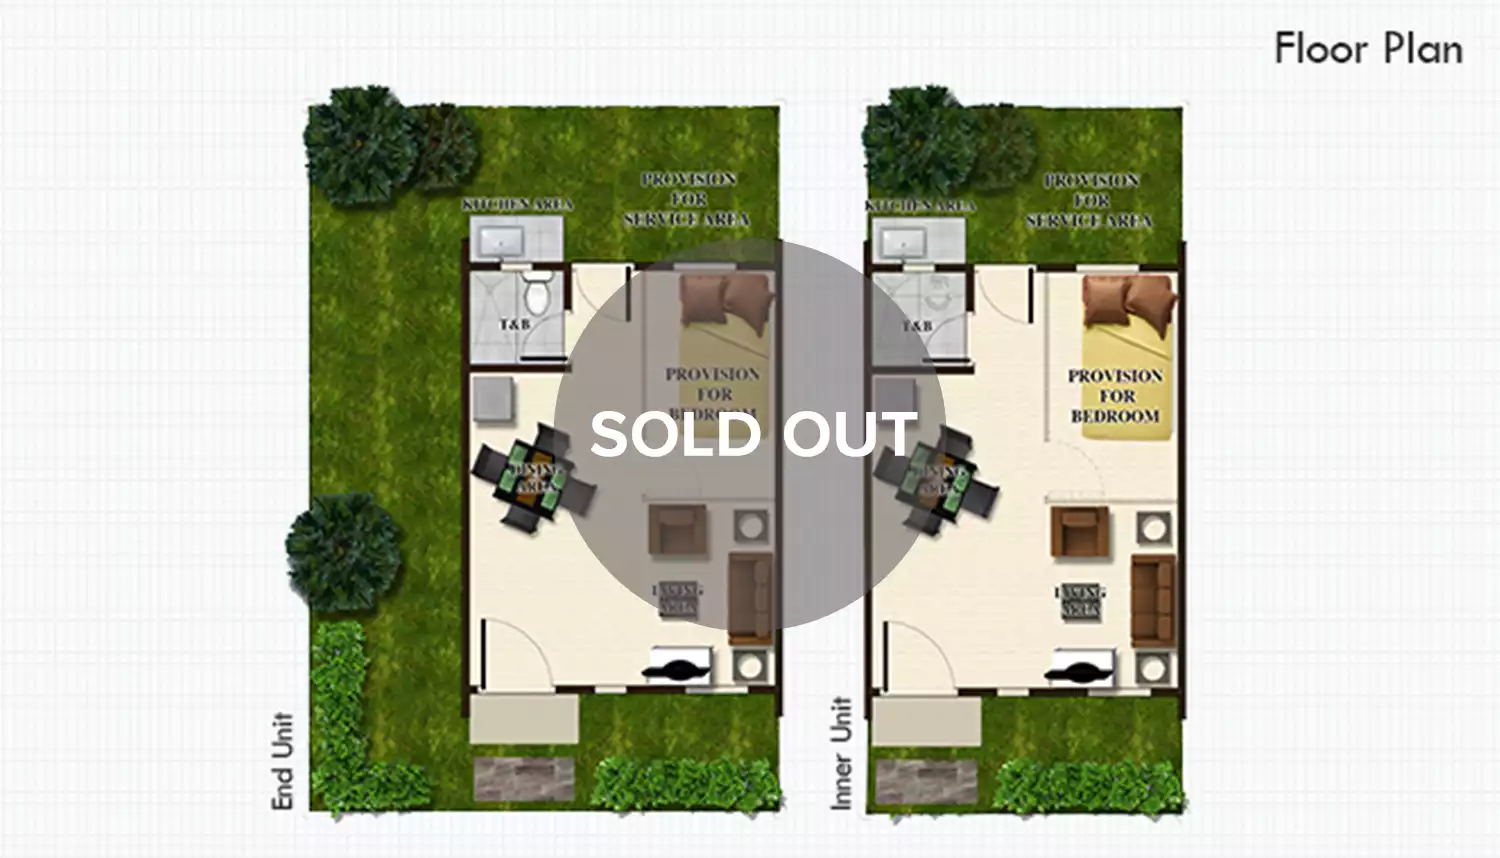 /assets/properties-house-model-gallery-and-landmarks-icons/lumina-home-models/home-model-gallery/airene-rowhouse/lumina-airene-rowhouse-floor-plan-sold-out.webp